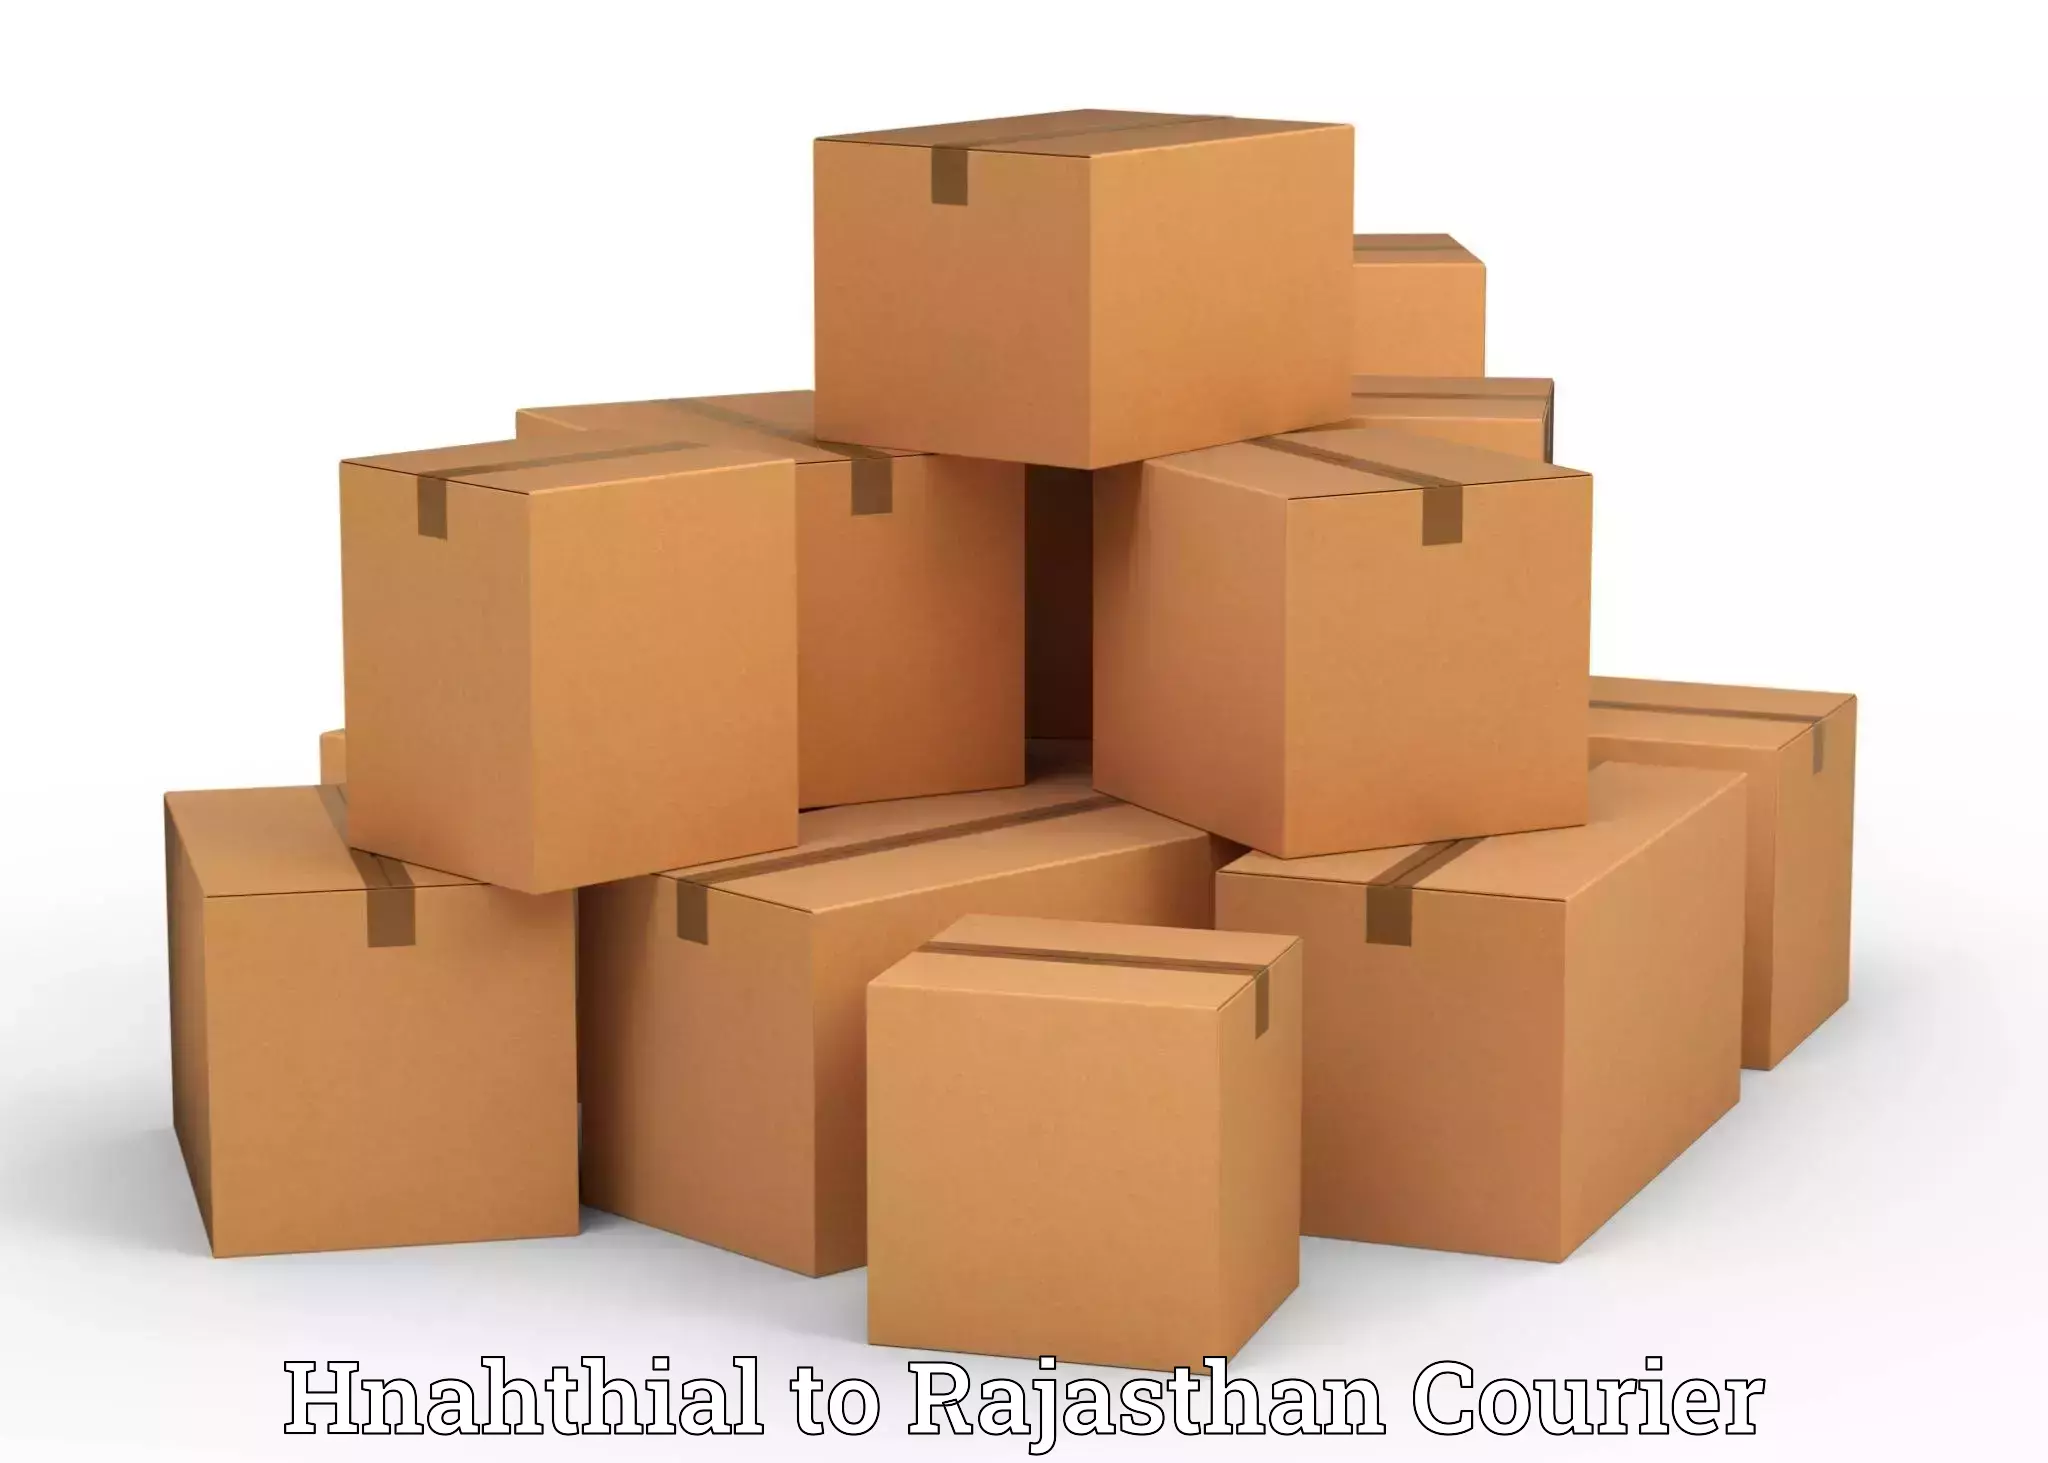 Residential furniture movers Hnahthial to Hanumangarh